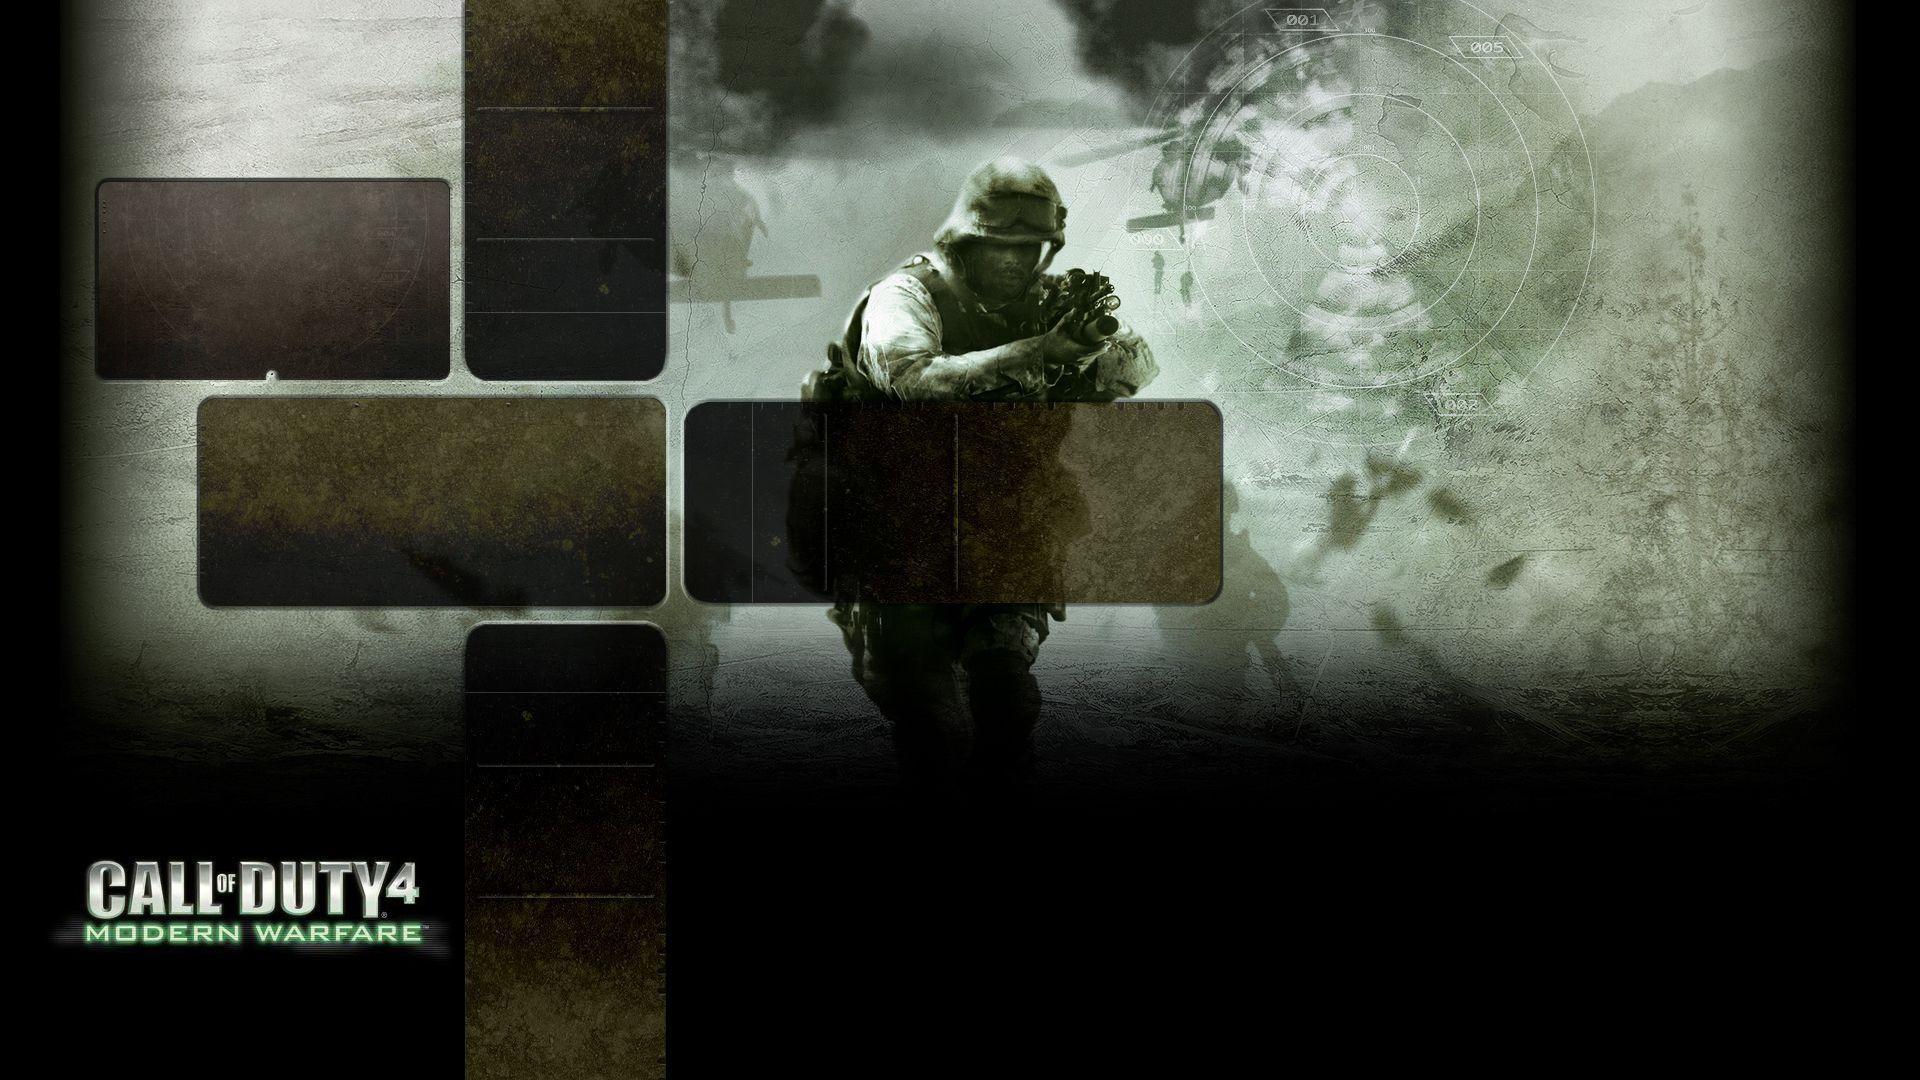 Games: Call of Duty 4: Modern Warfare, picture nr. 44047